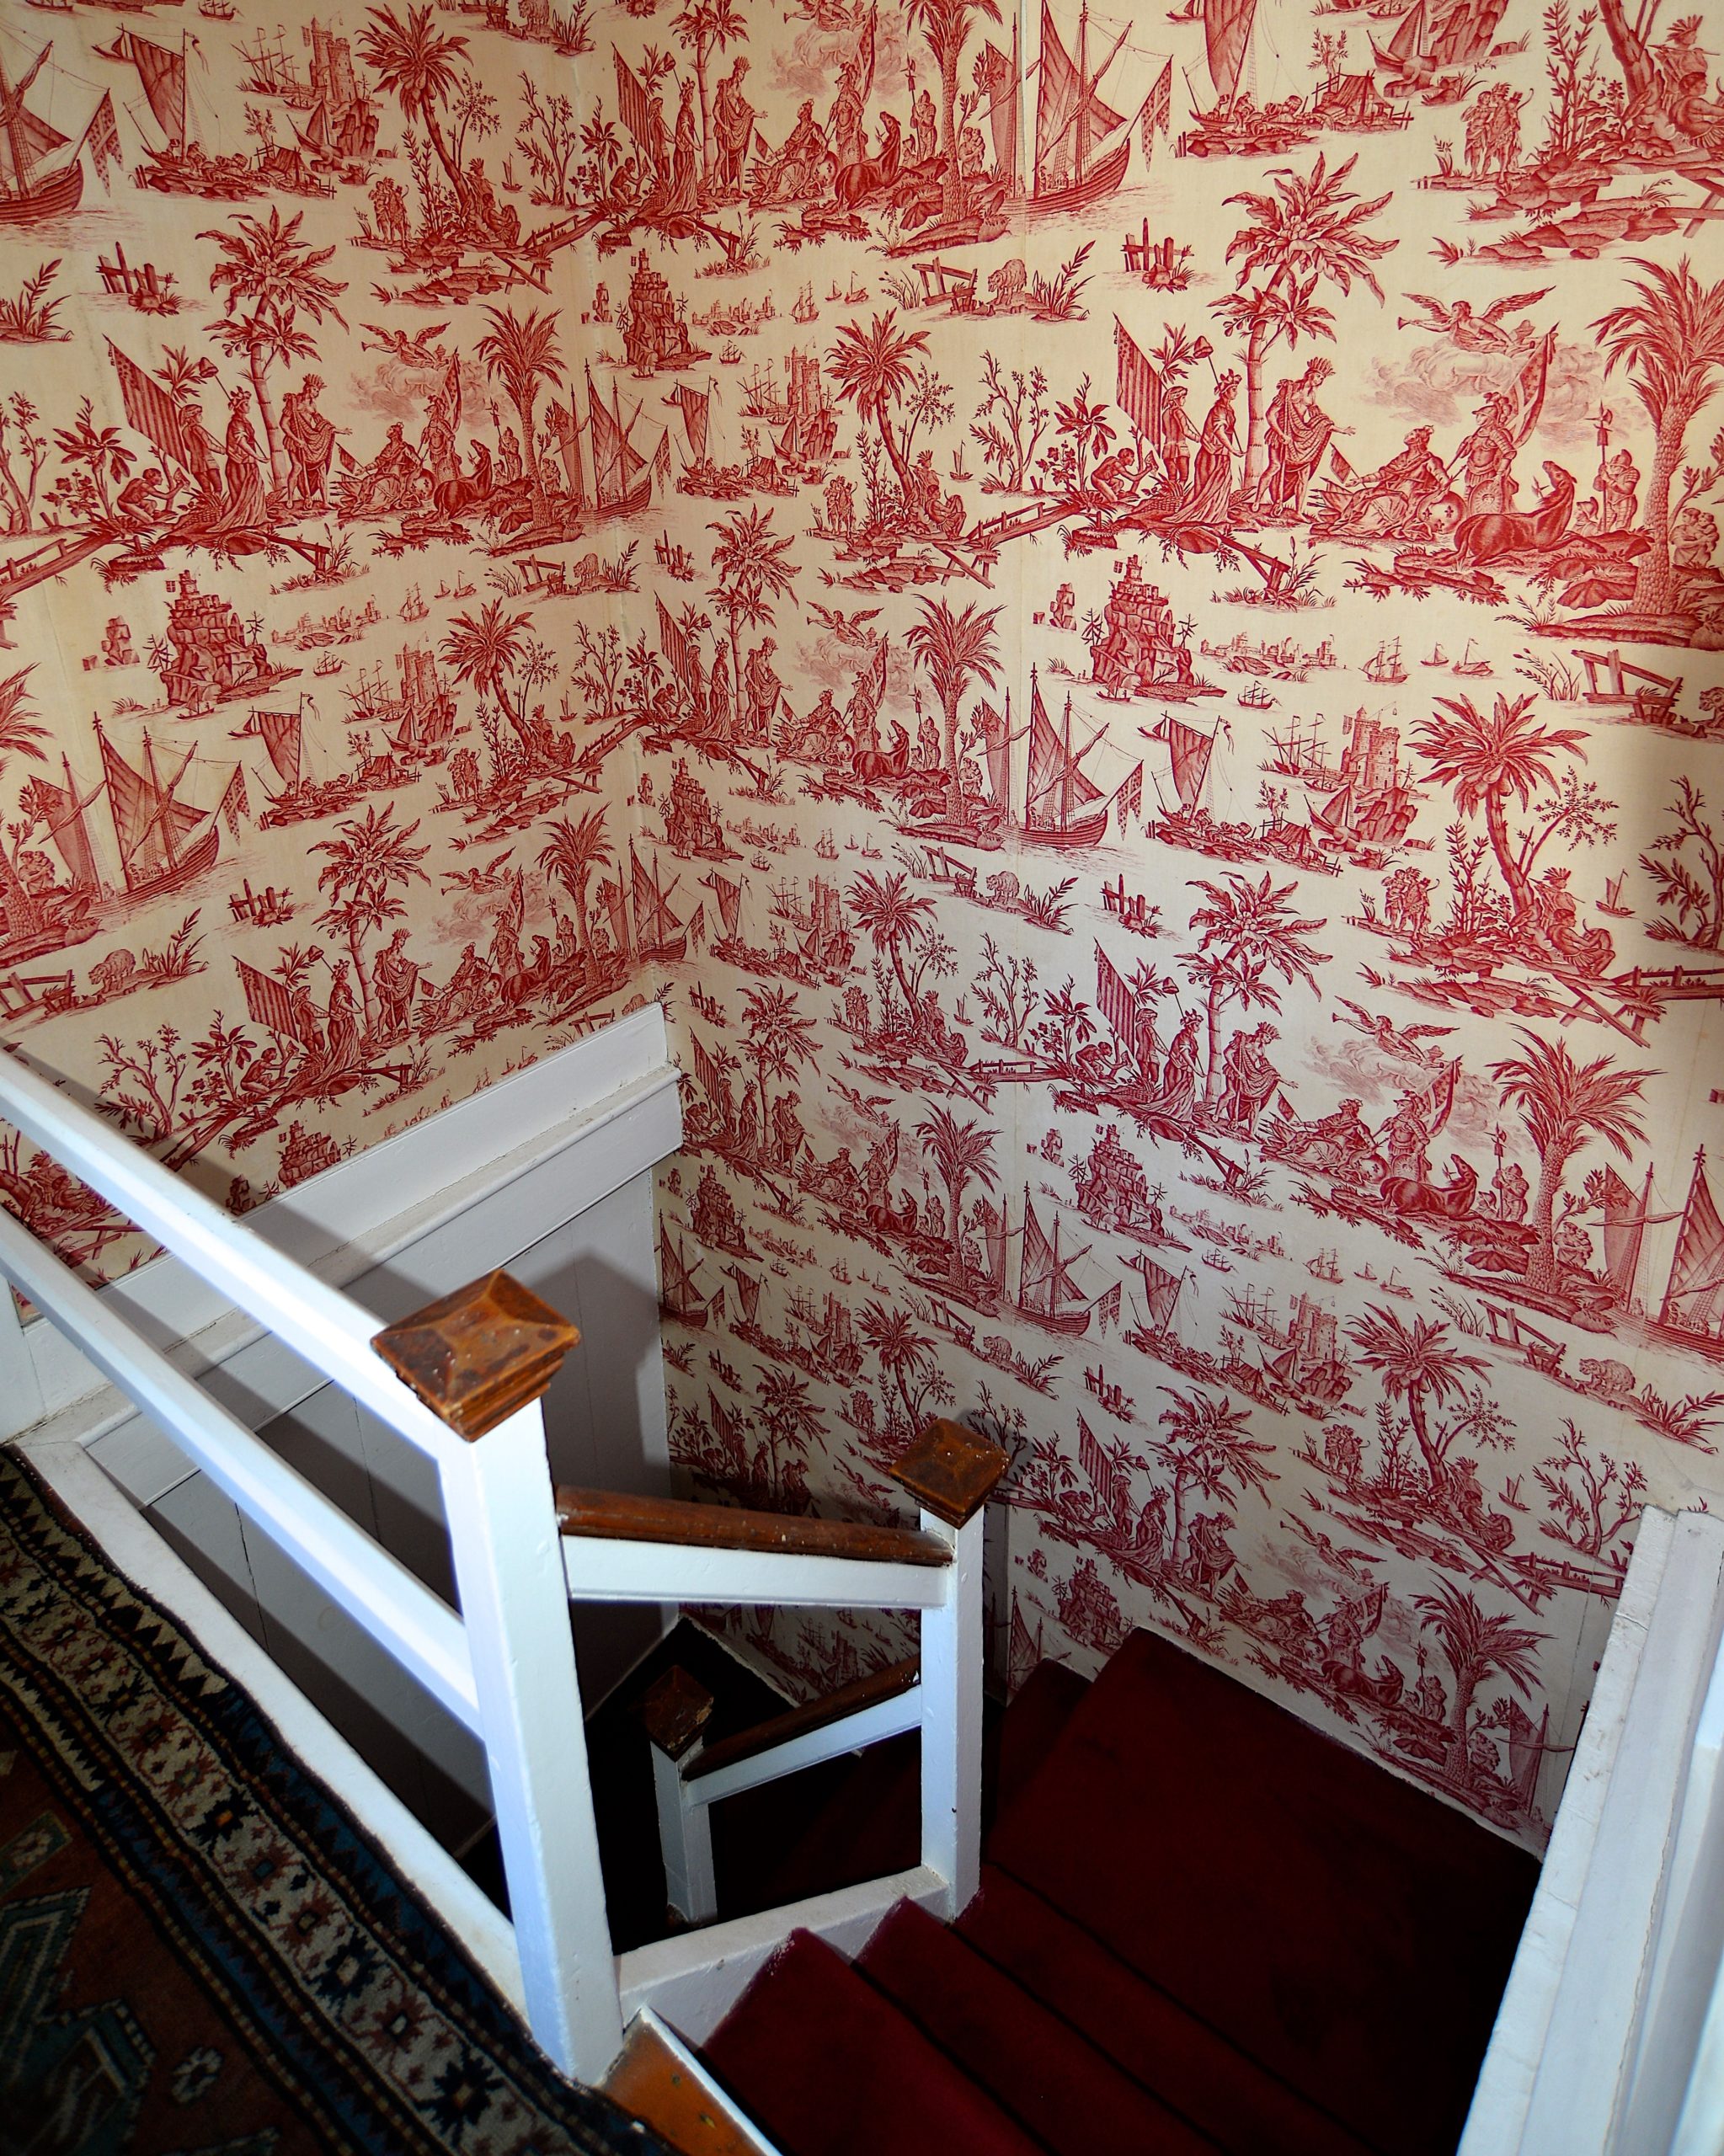 Toile wallpaper depicting France welcoming the new nation of the United States.